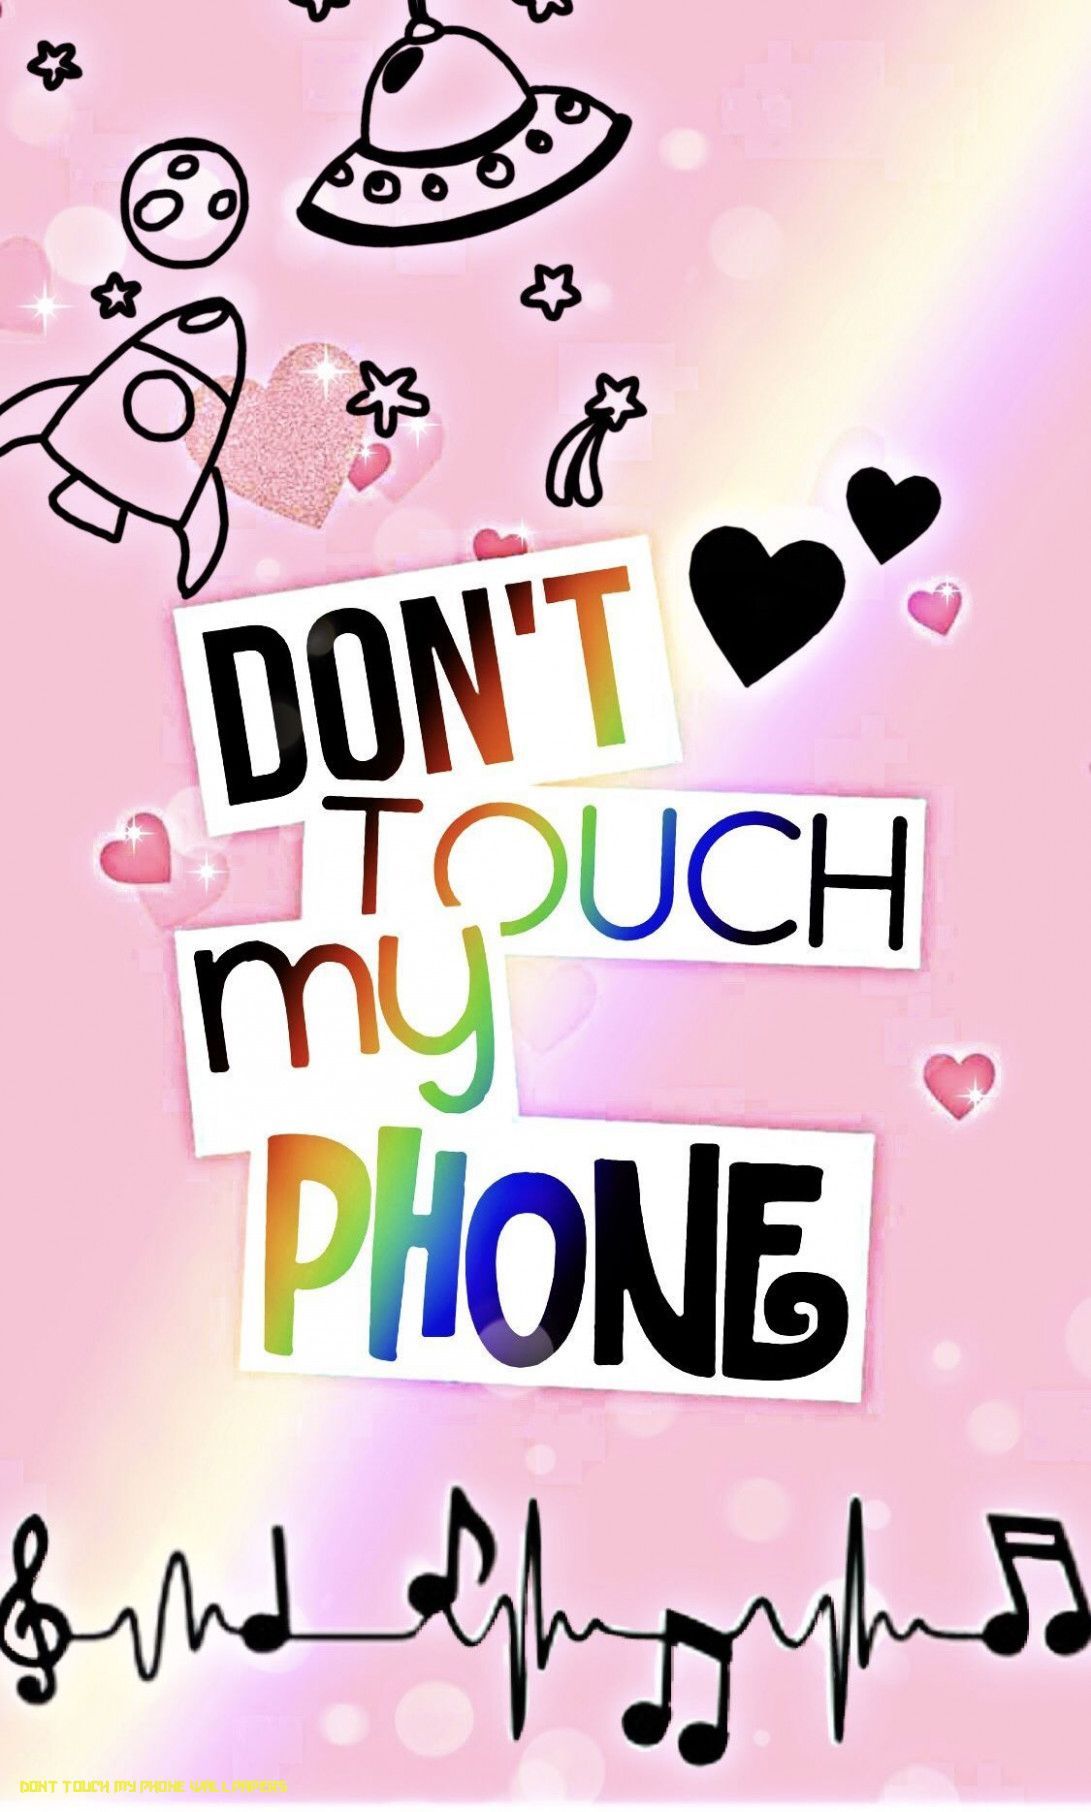 How To Get People To Like Dont Touch My Phone Wallpaper. dont touch my phone wallpa. Dont touch my phone wallpaper, Phone wallpaper pink, Funny phone wallpaper